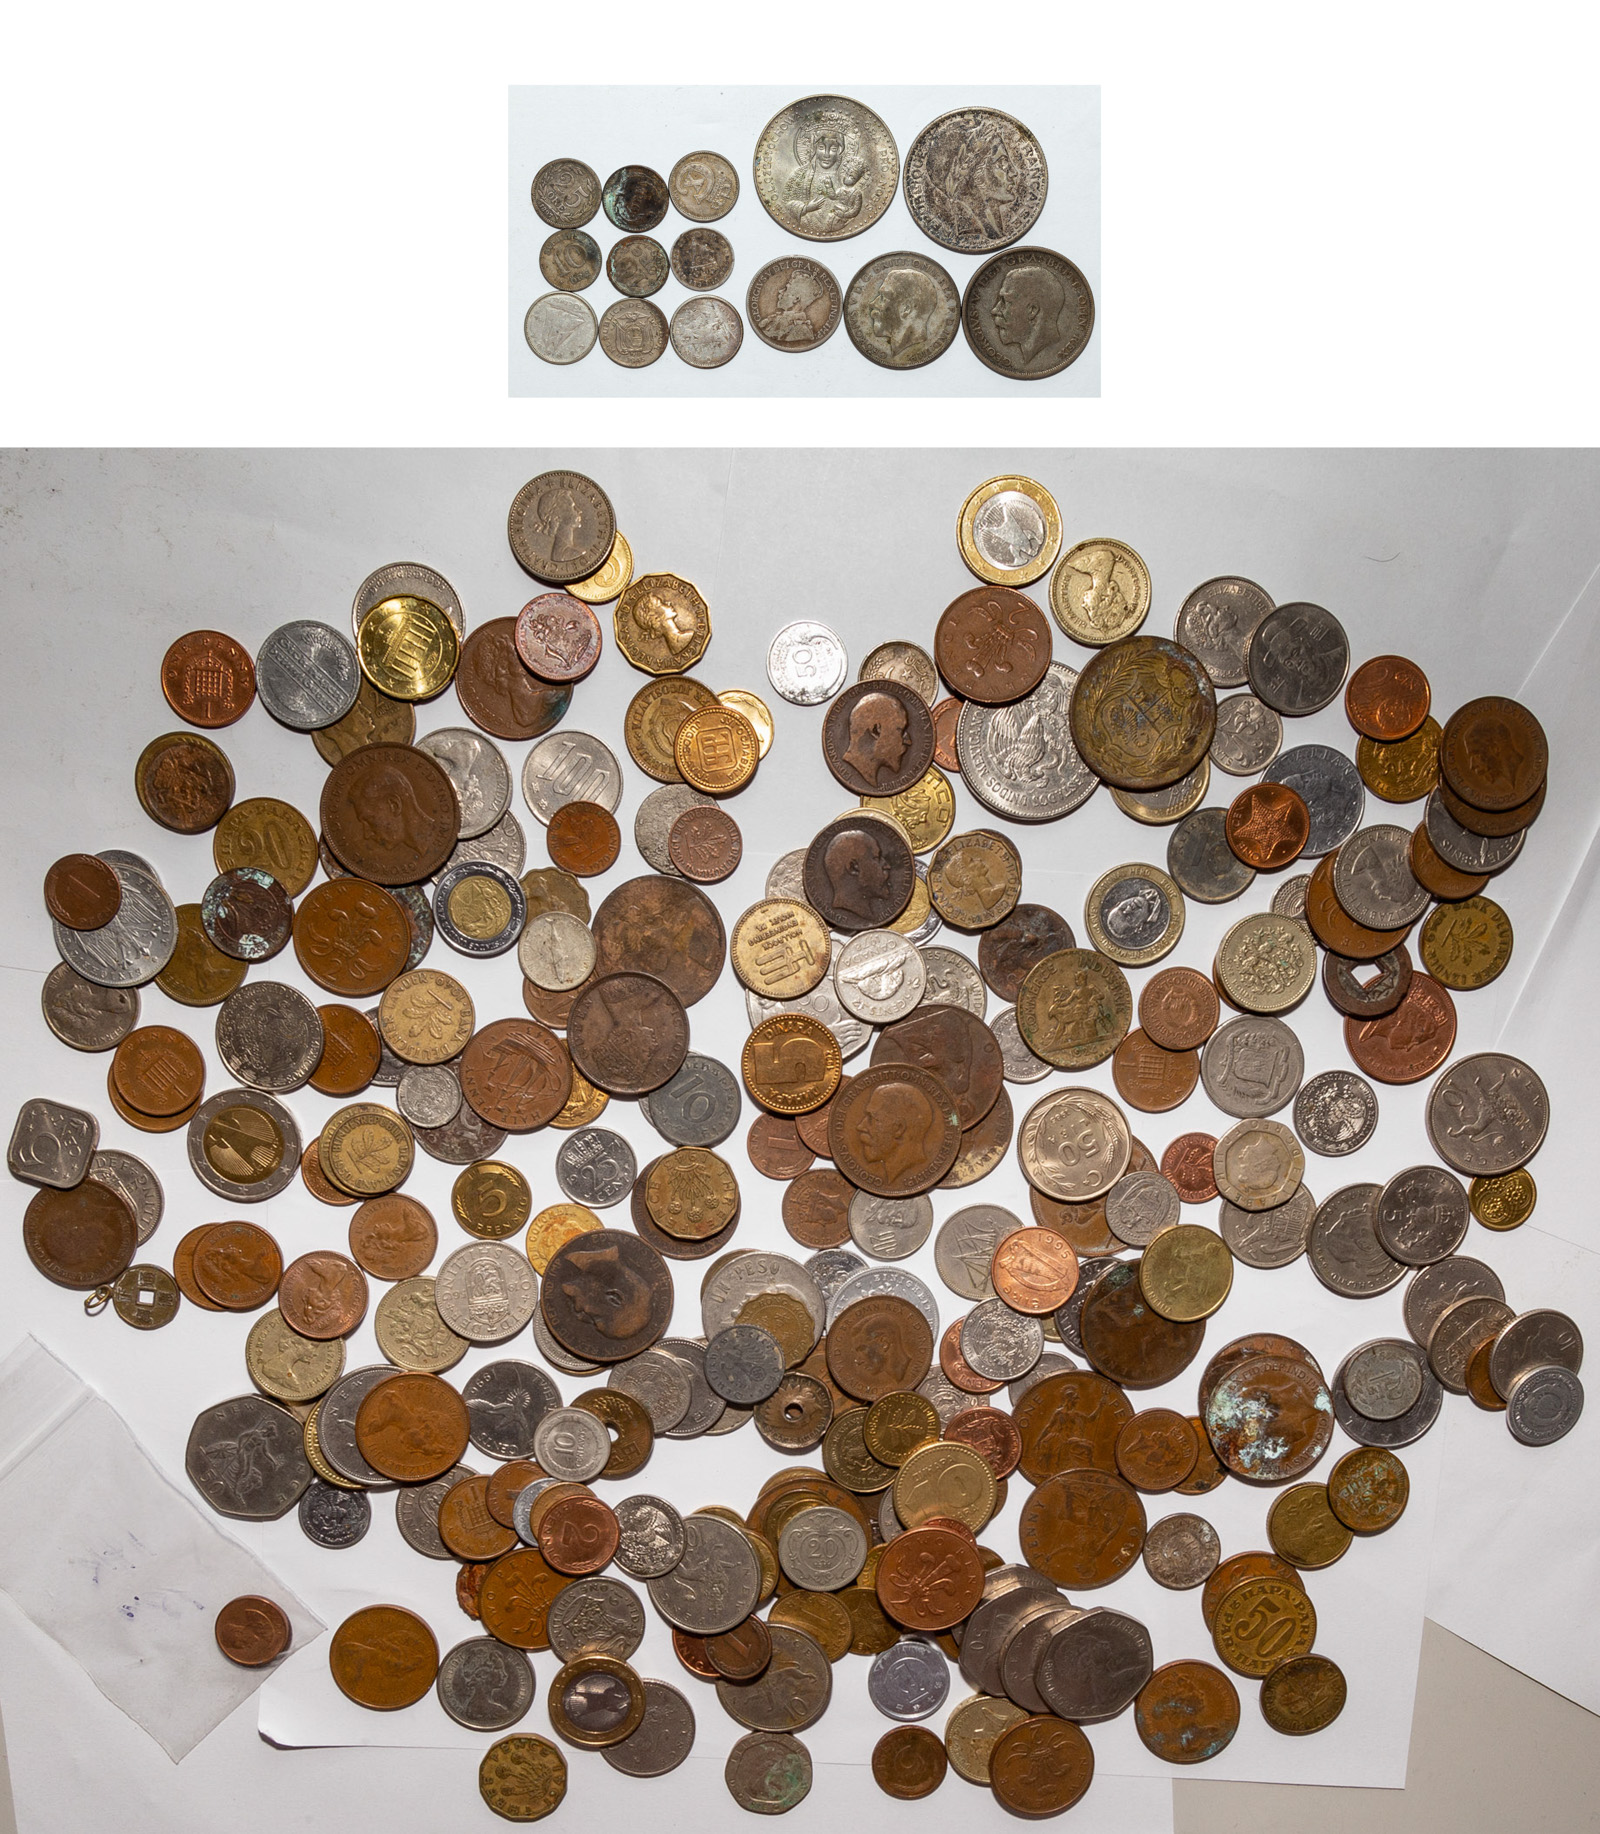 SEVERAL HUNDRED WORLD COINS WITH